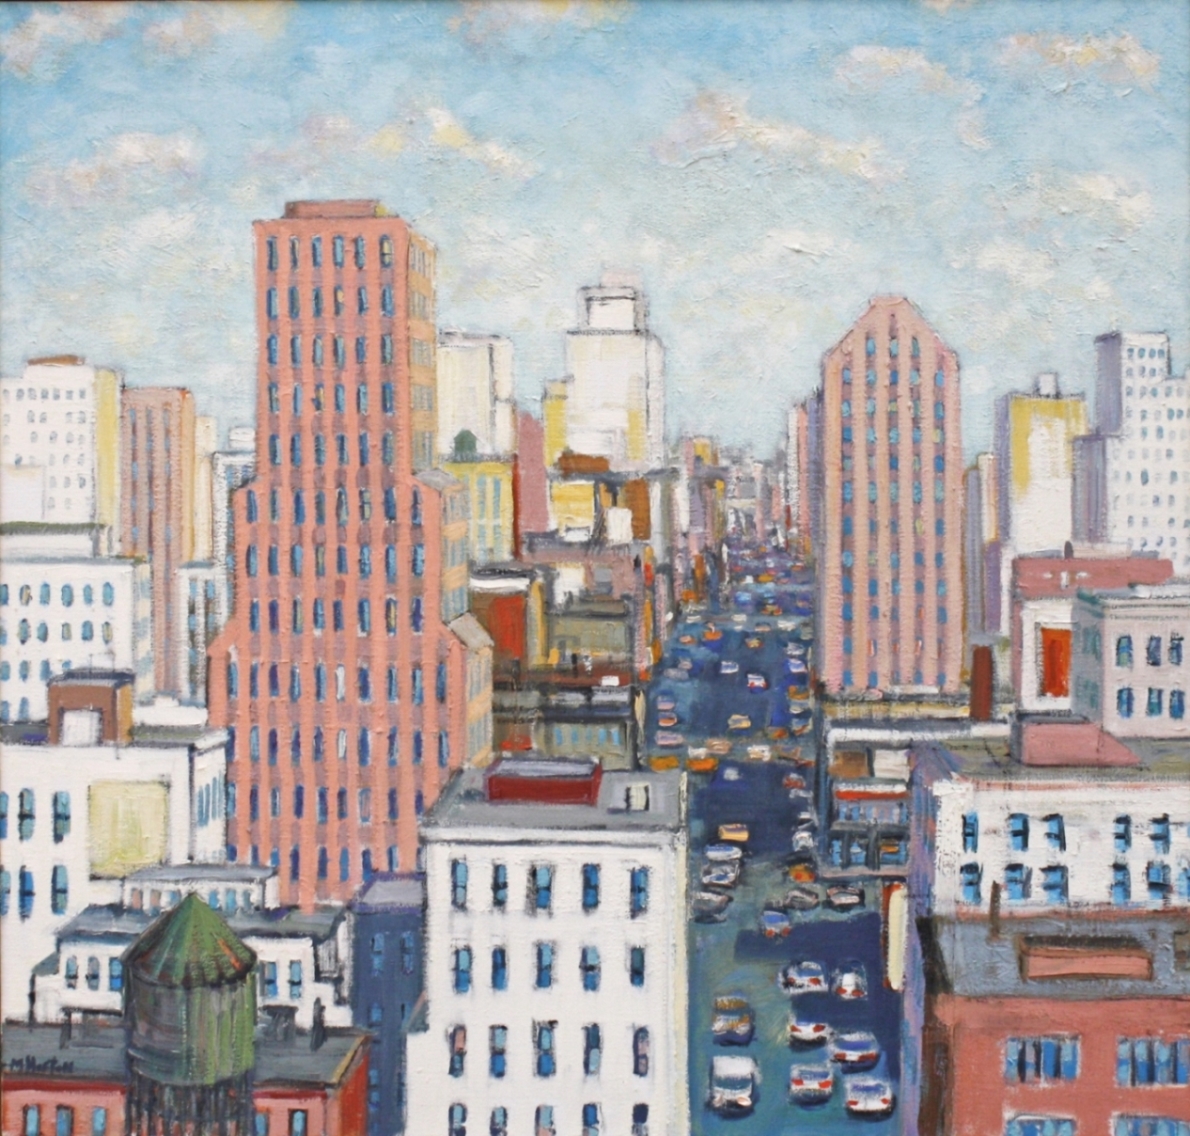 White Buildings, Blue Sky and Clouds 40"x42"